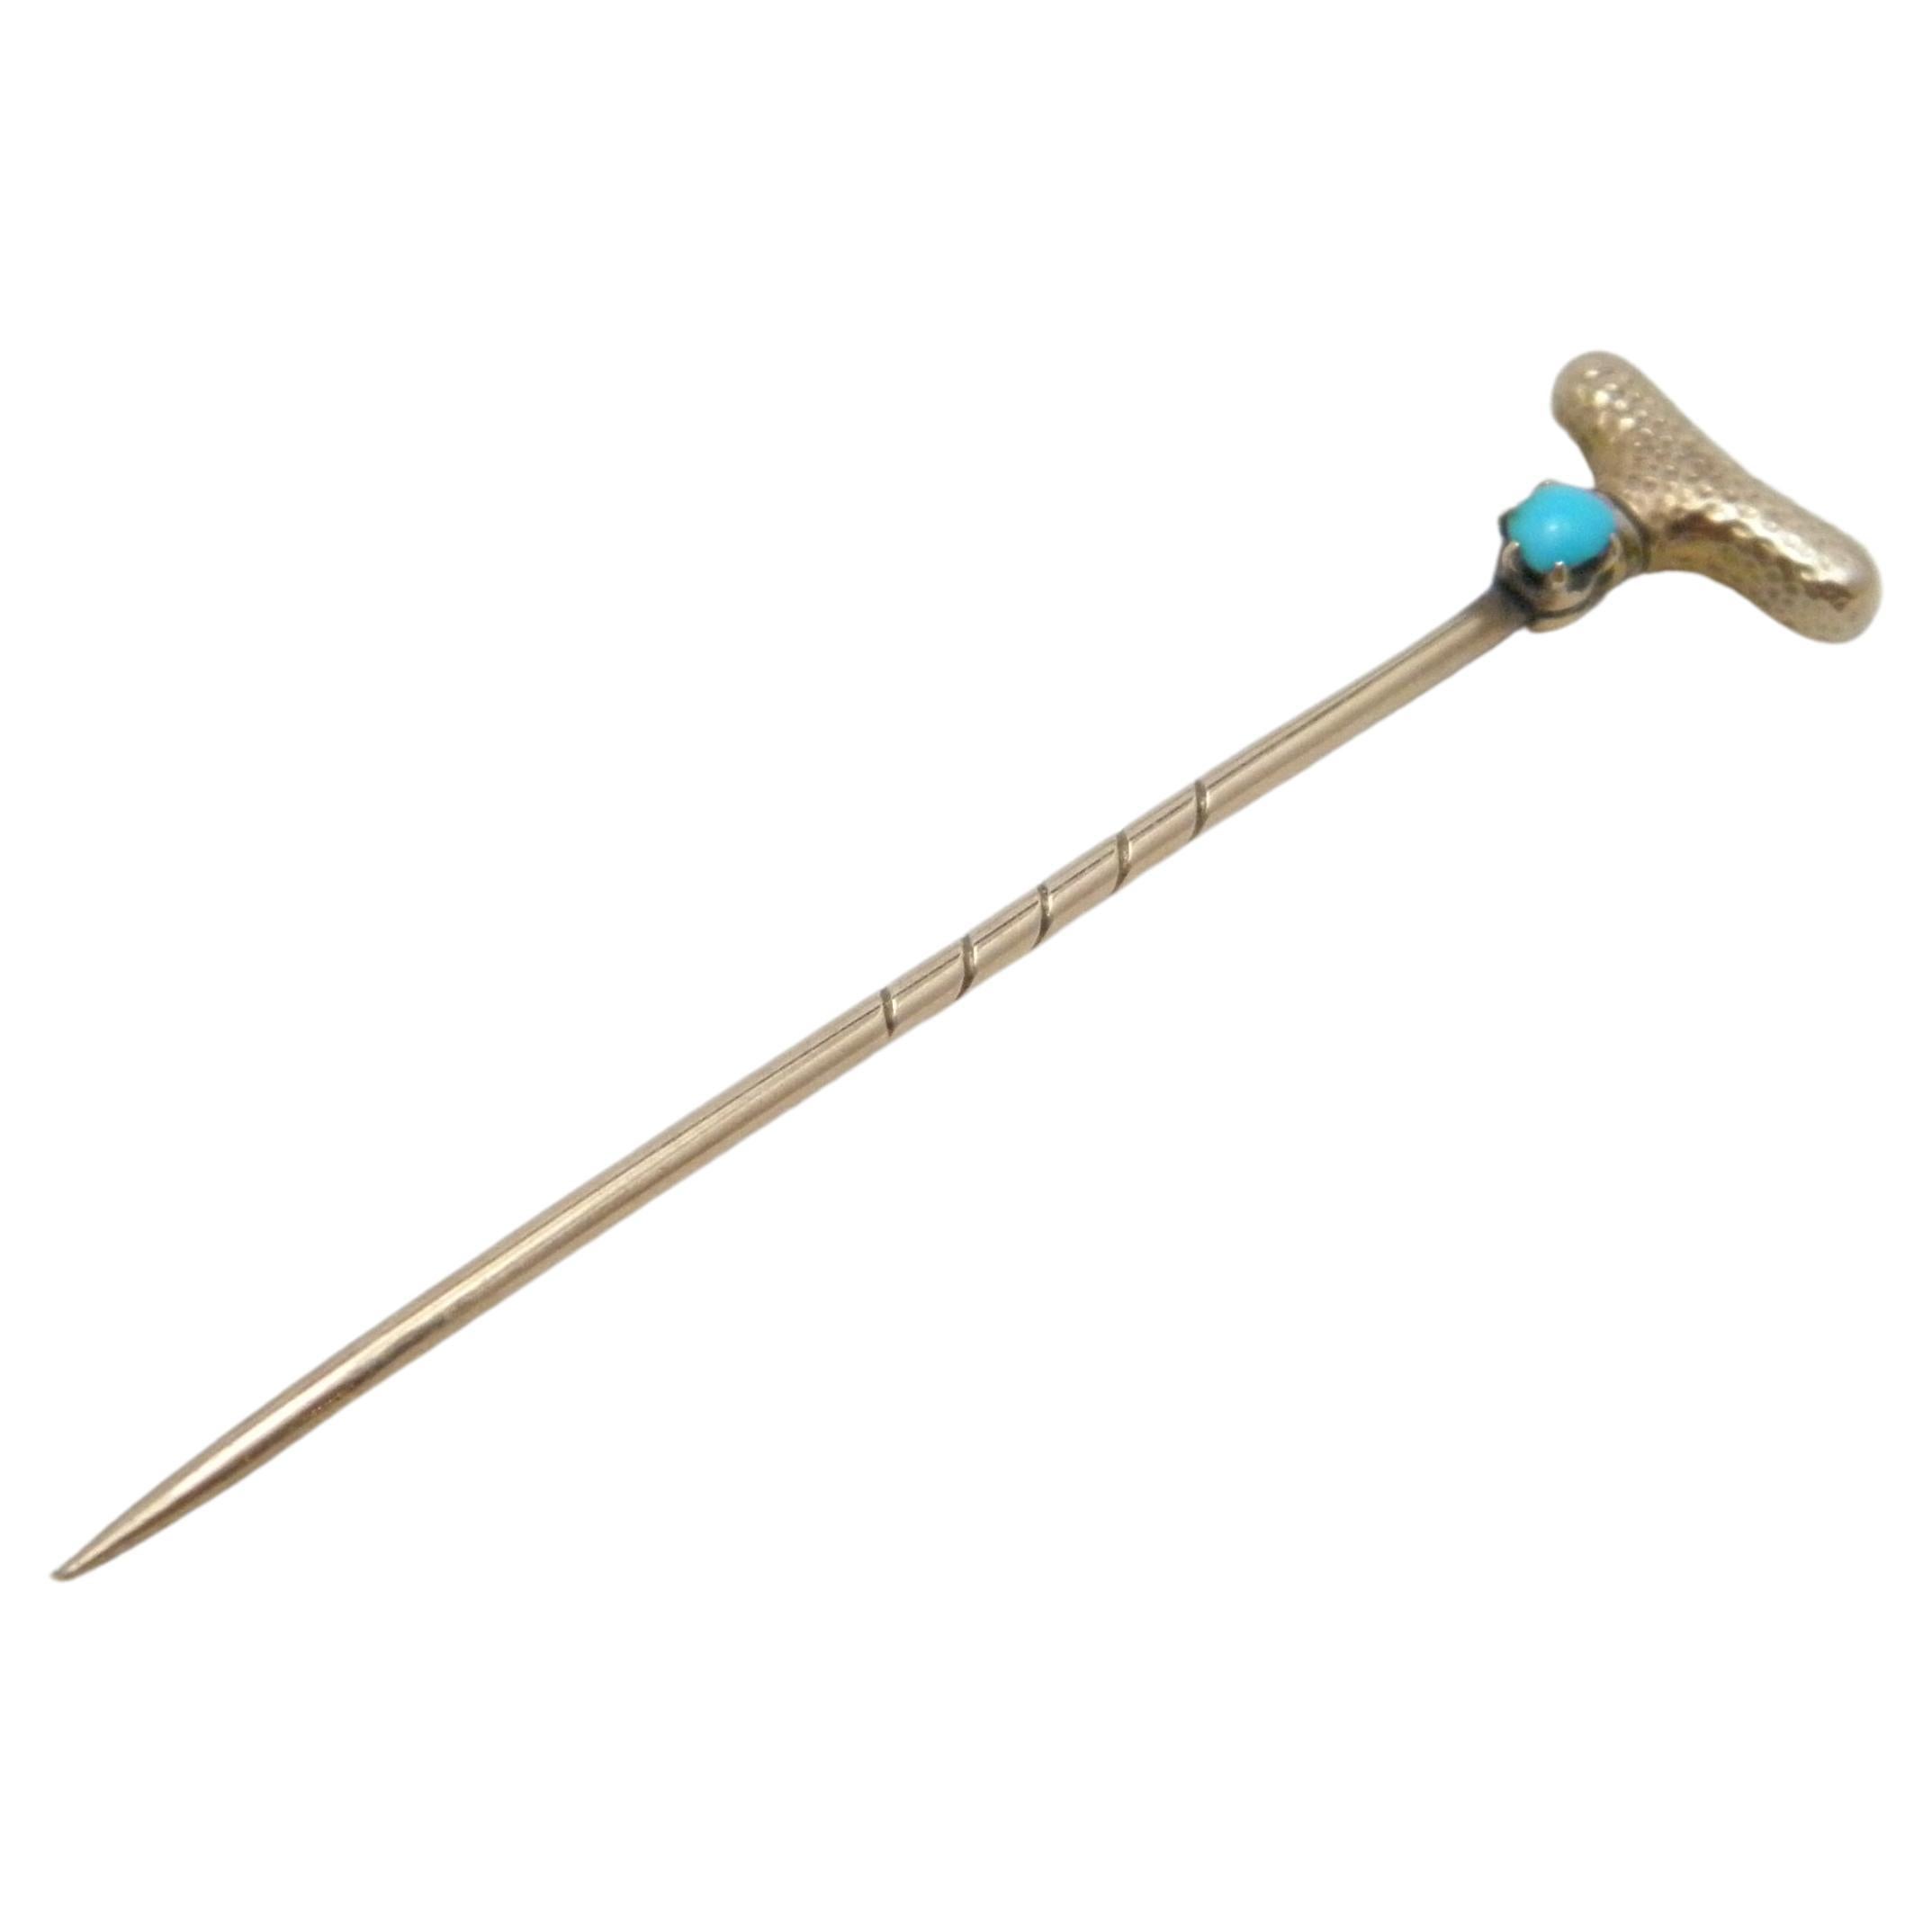 Antique 15ct Gold Turquoise Stock Pin Brooch c1880 Heavy 625 Rose Walking Stick For Sale